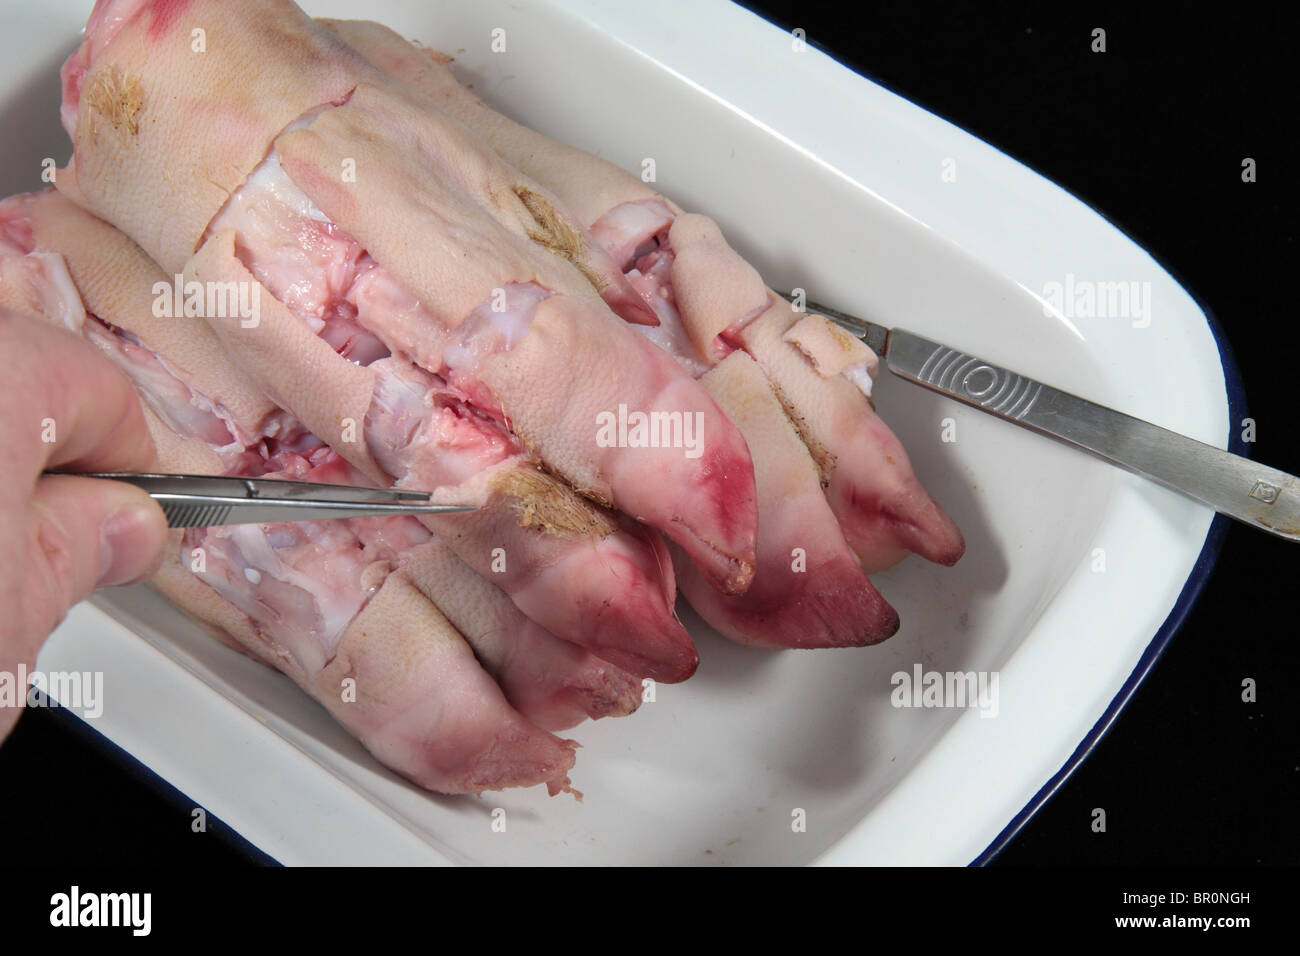 Close up view of partially dissected pigs trotters after being used in a UK school science lesson. Stock Photo